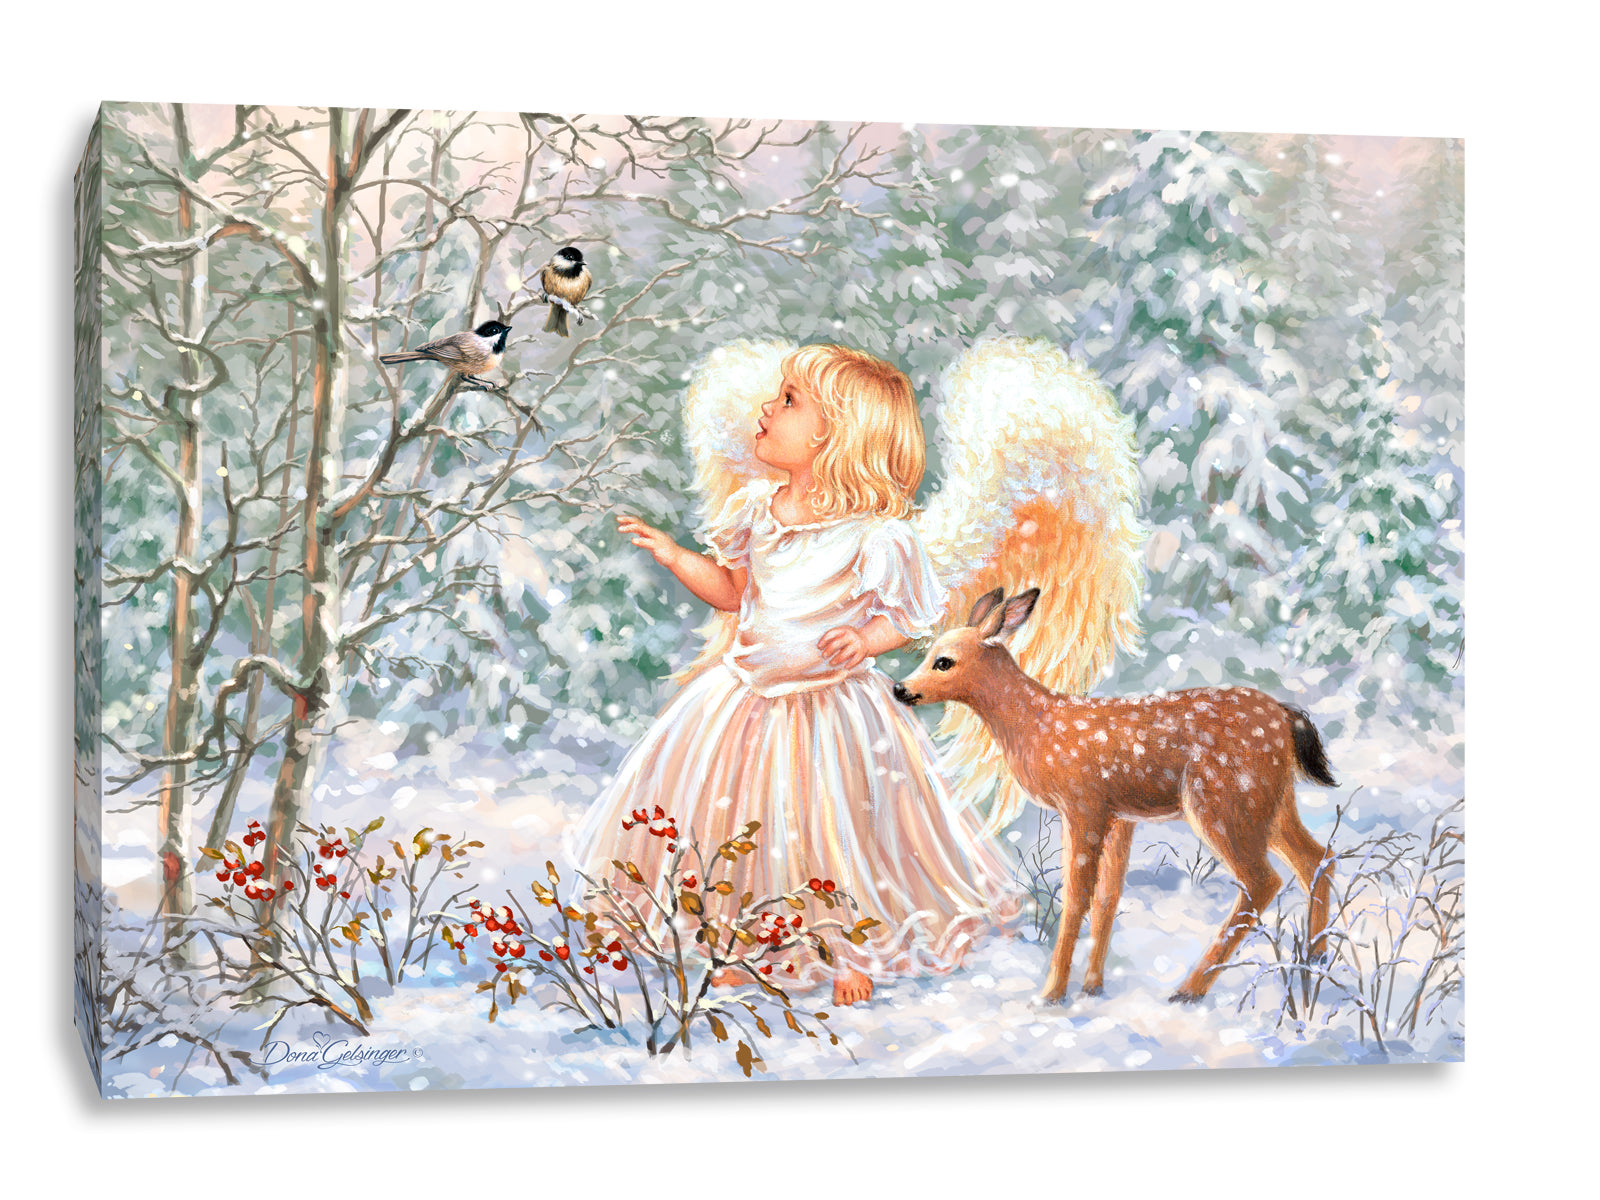  This stunning piece captures the essence of winter wonderland with a beautiful young angel standing in a snow-covered forest. With a fawn nearby and birds perched in the trees, the angel is lost in wonder and awe of the natural beauty around her.